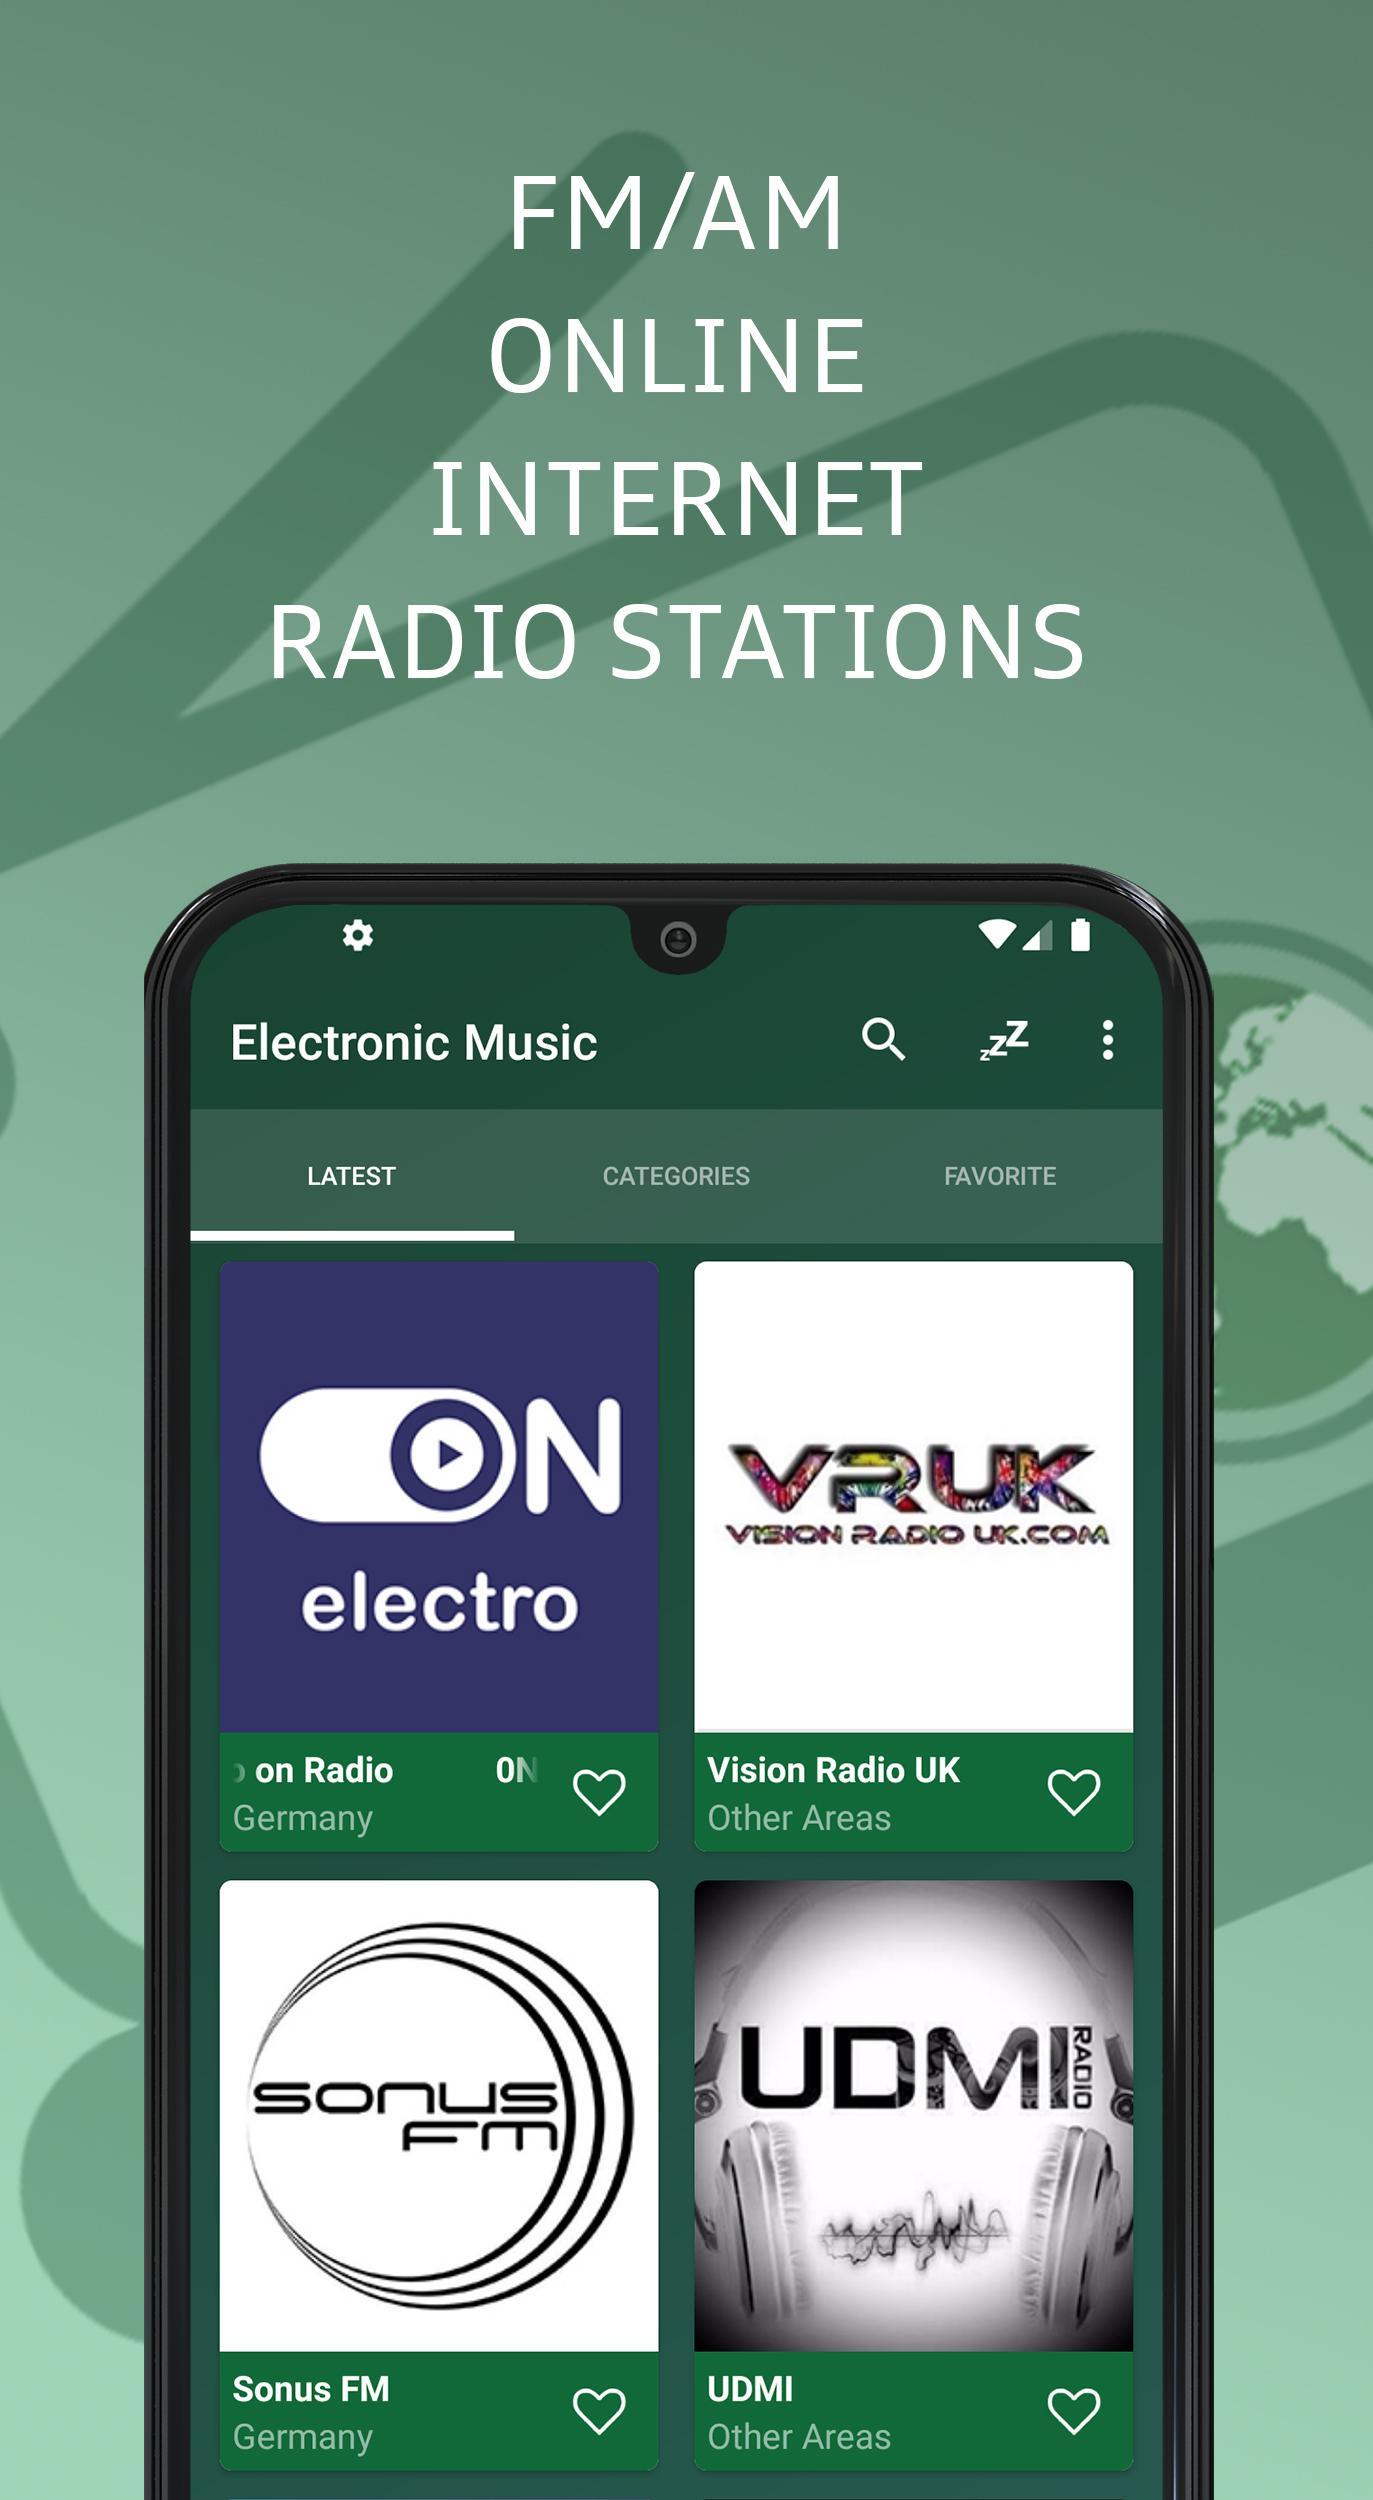 Electronic Music for Android - APK Download